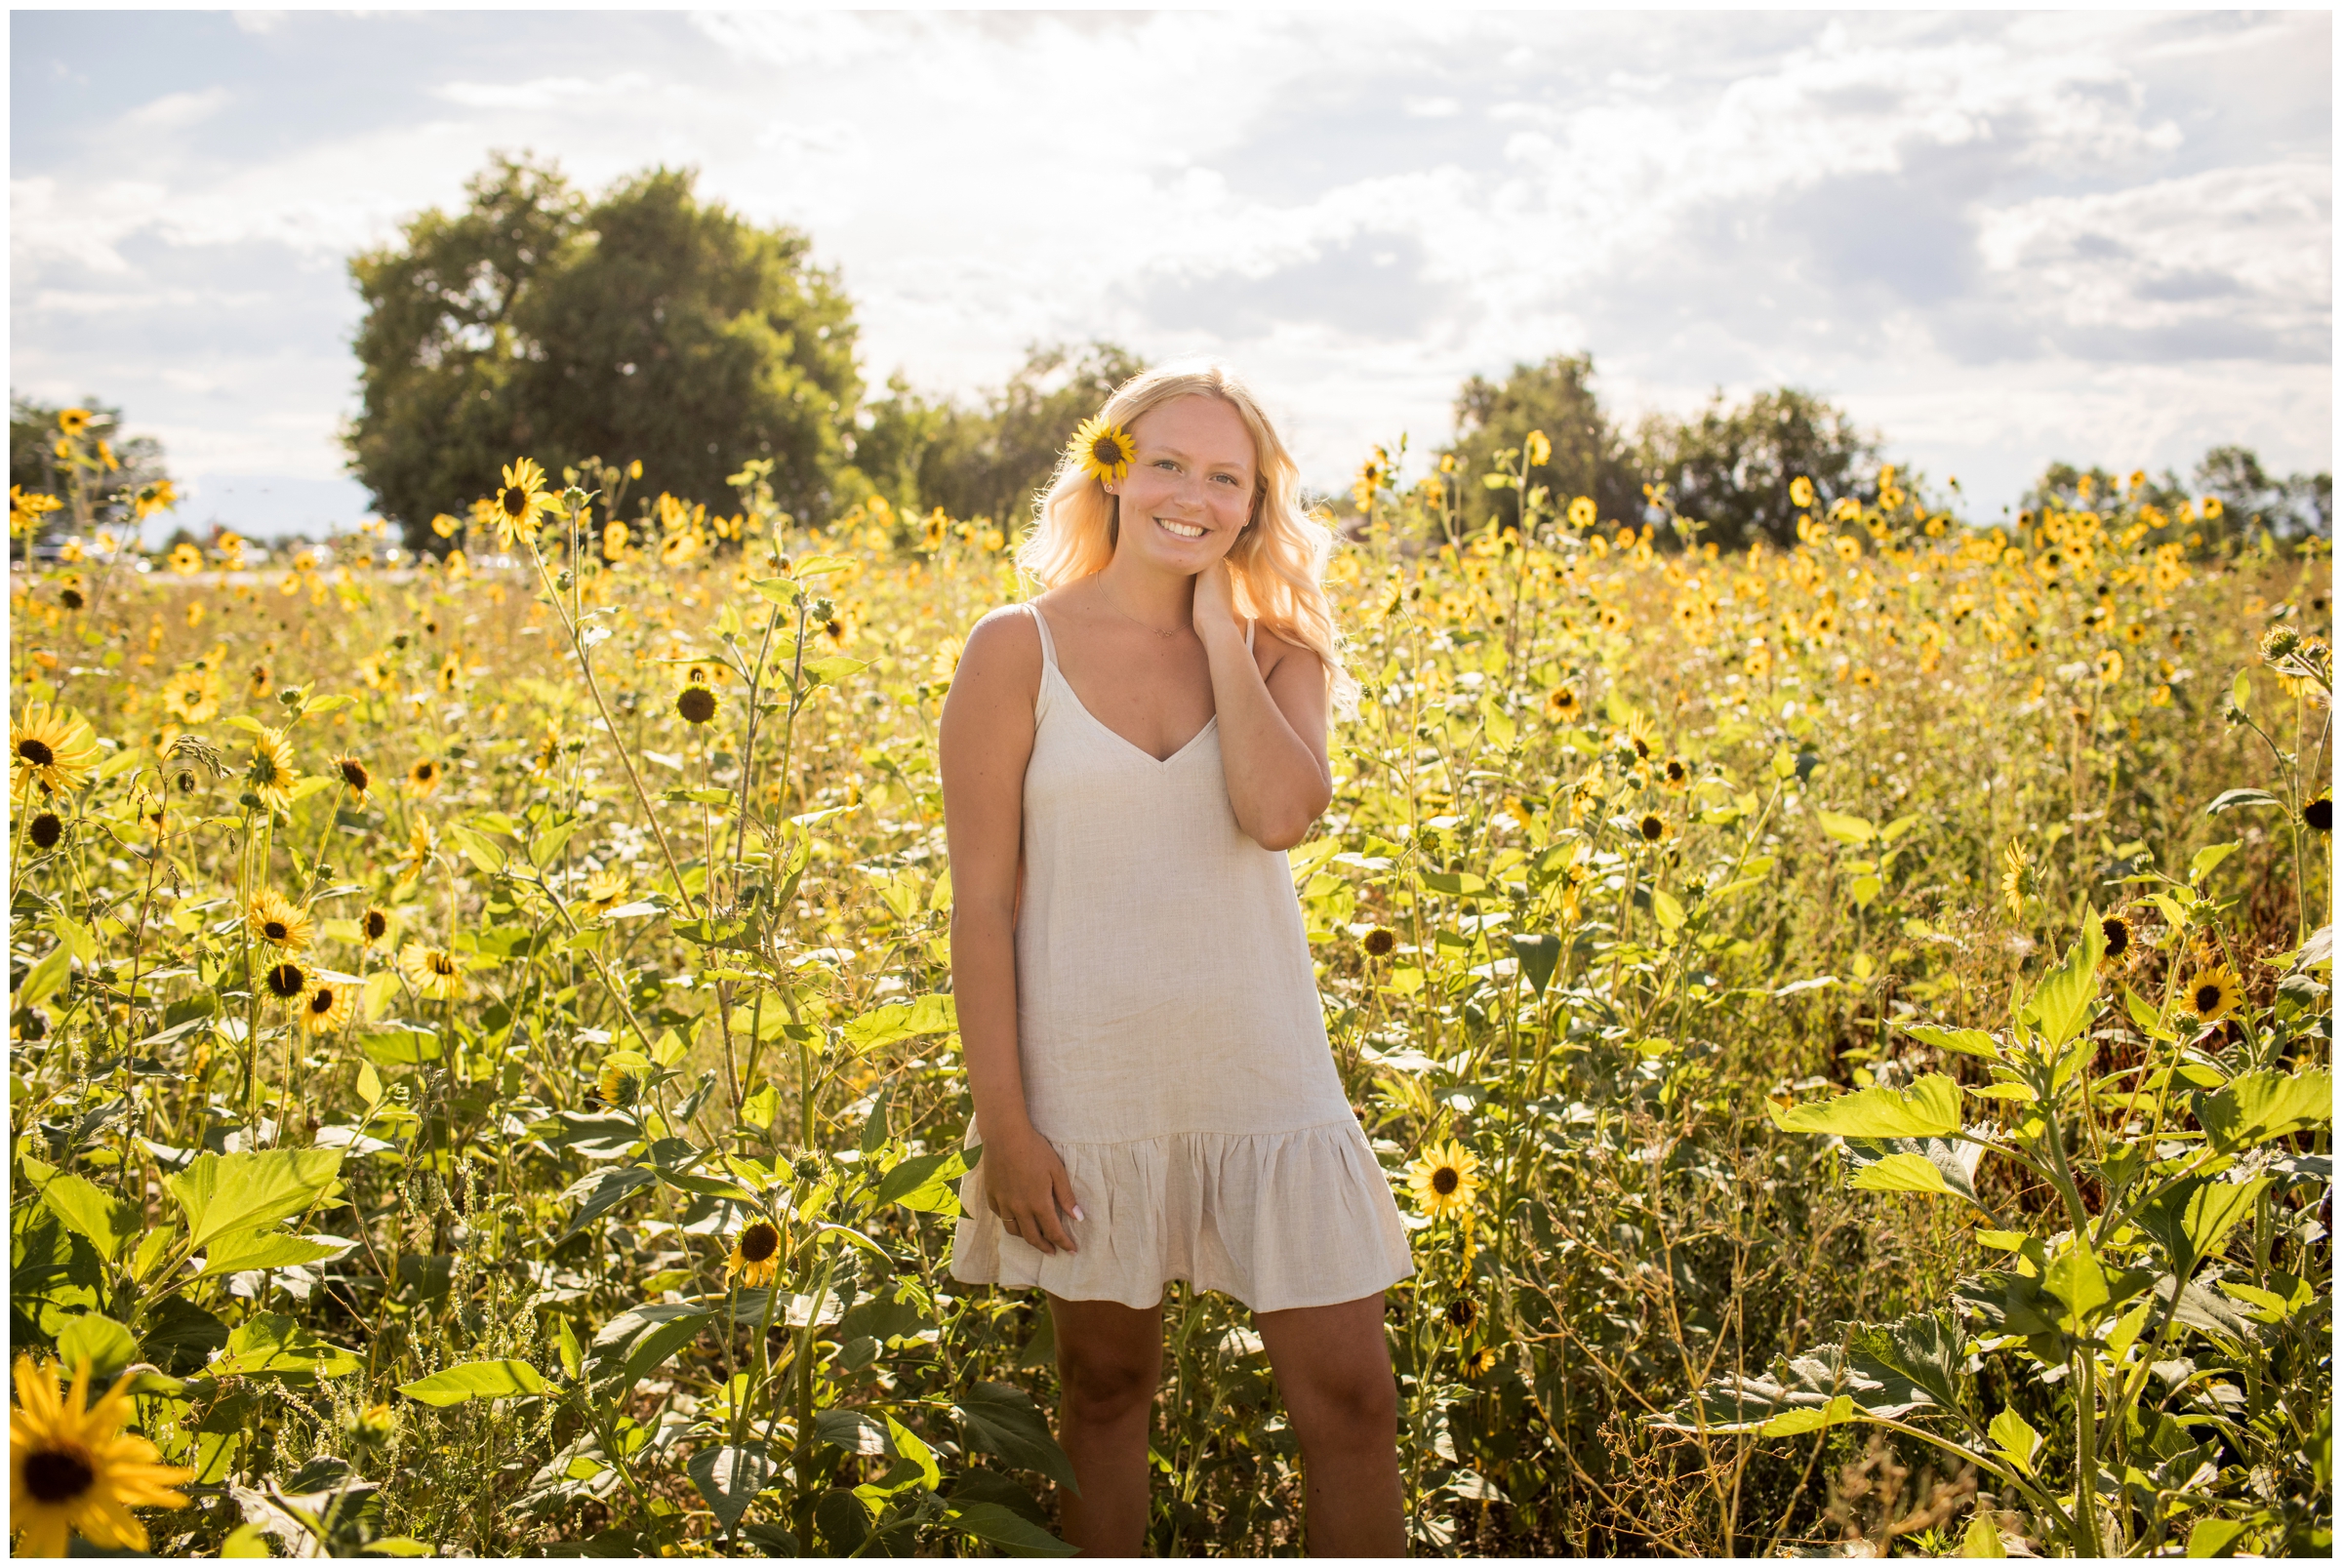 Erie senior portraits in a sunflower field by Northern Colorado photographer Plum Pretty Photography